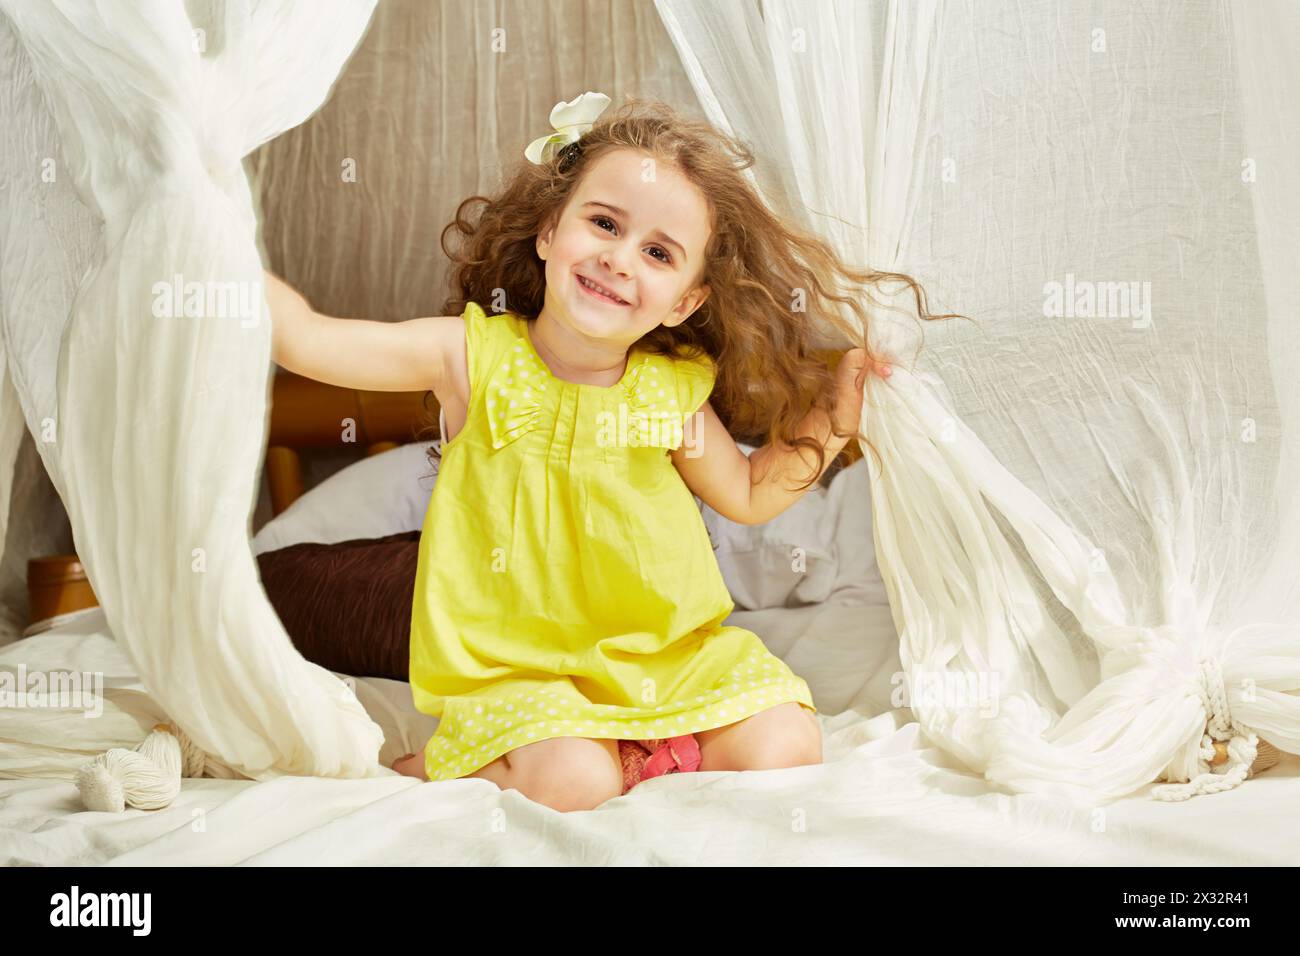 Smiling little girl in yellow dress sits on tent bed Stock Photo